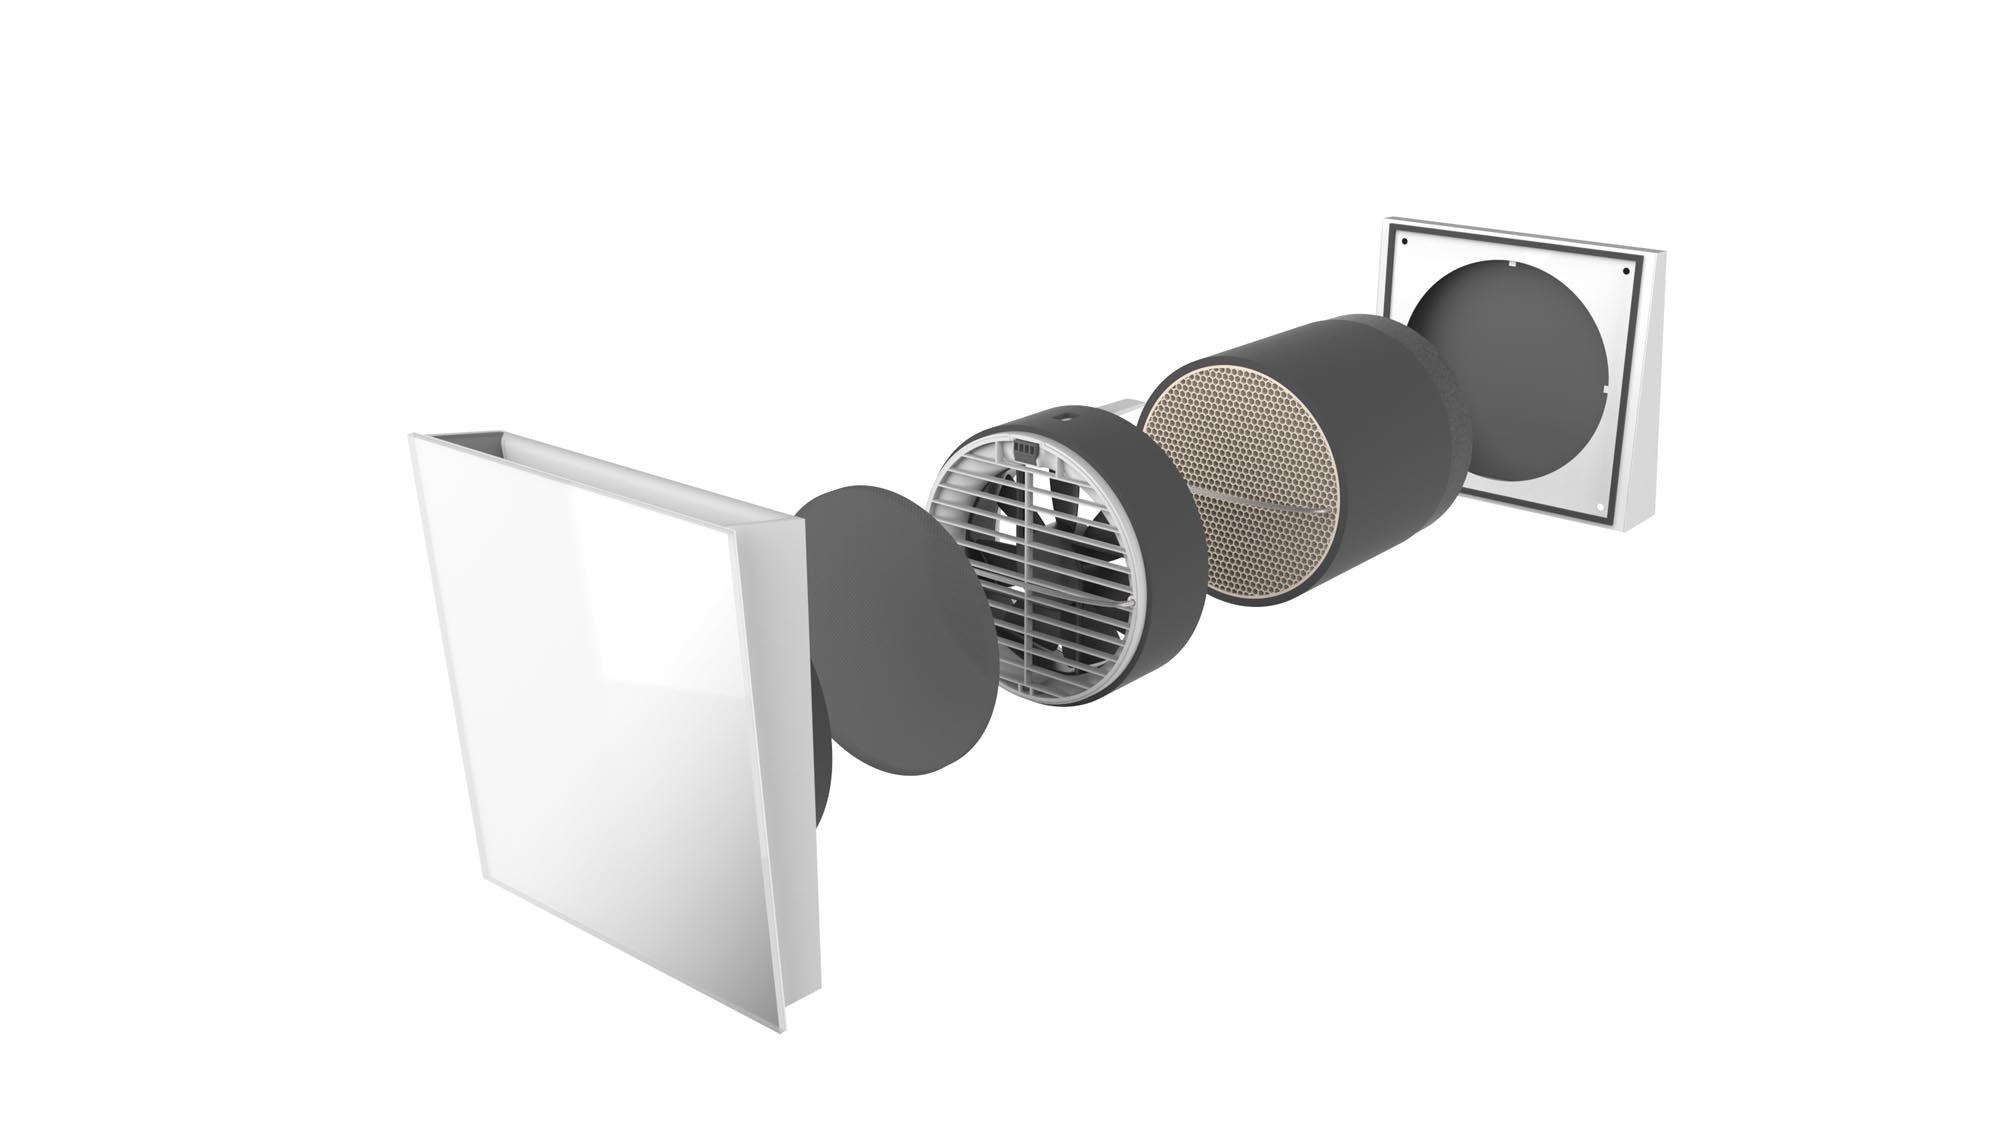 x-well D12 pendulum fan – for ventilating apartments and houses.